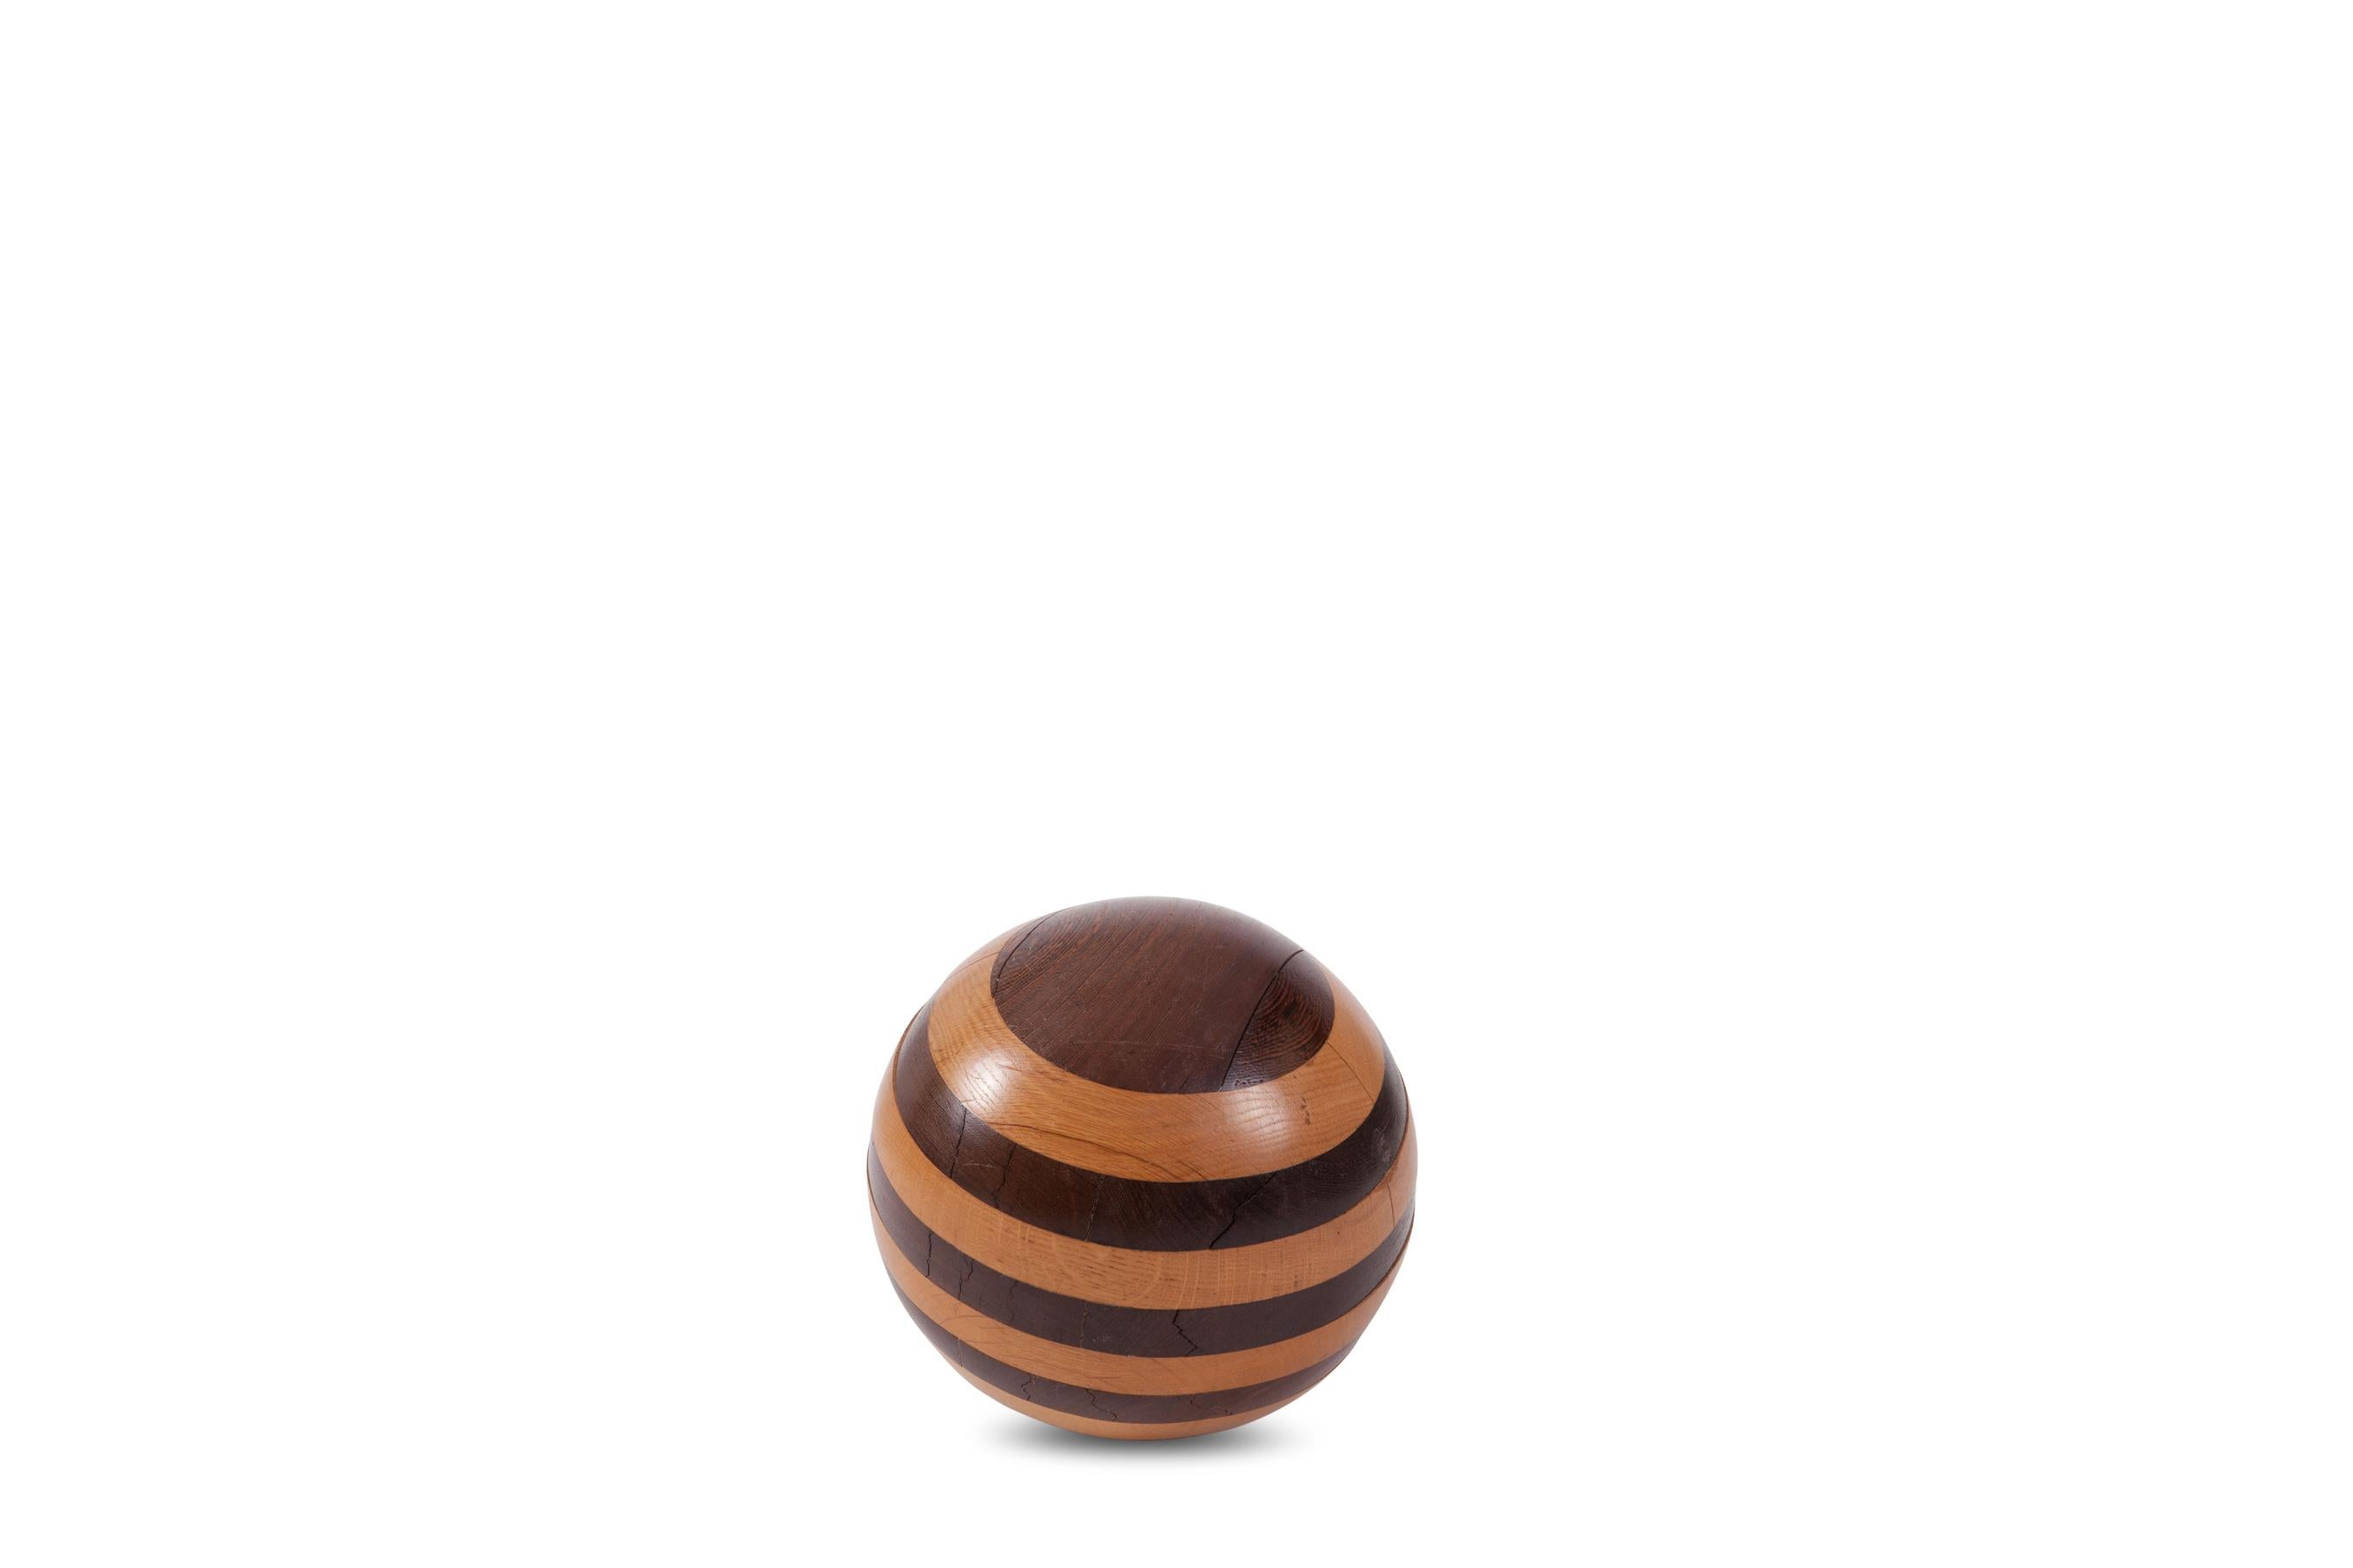 Handcrafted wooden sphere, layered in solid oak and wedge.
A extremely decorative item.
Check out our Goldwood Storefront for more matching pieces.